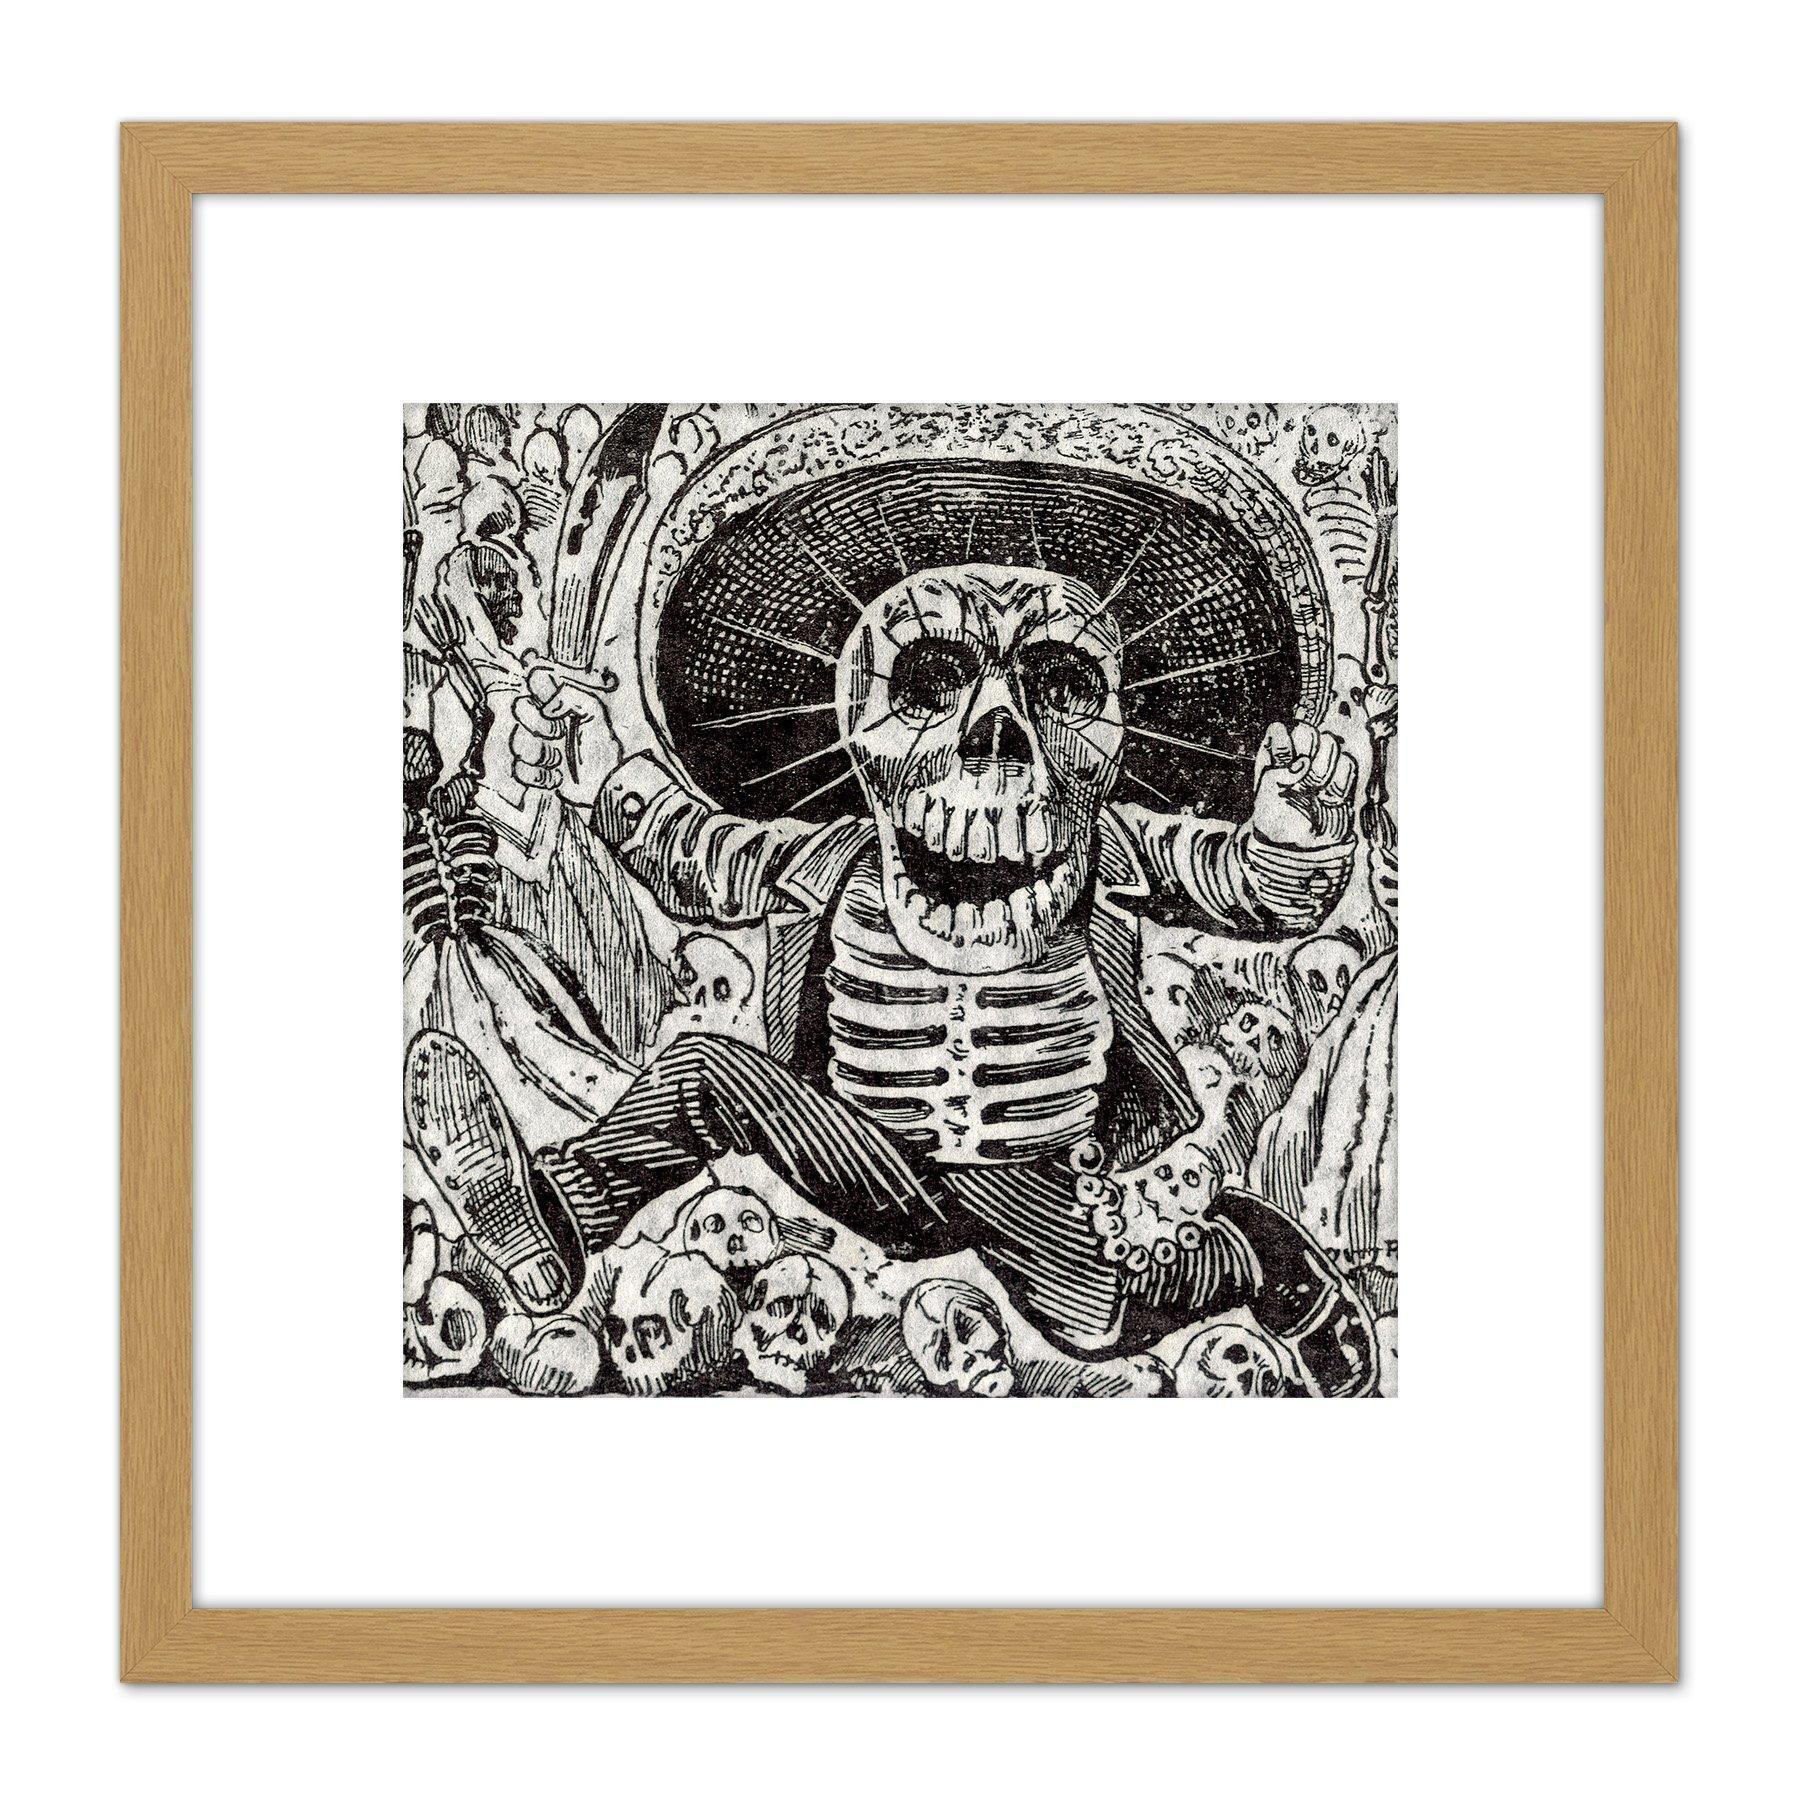 Guadalupe Calavera Skull From Oaxaca Mexico 8X8 Inch Square Wooden Framed Wall Art Print Picture with Mount - image 1